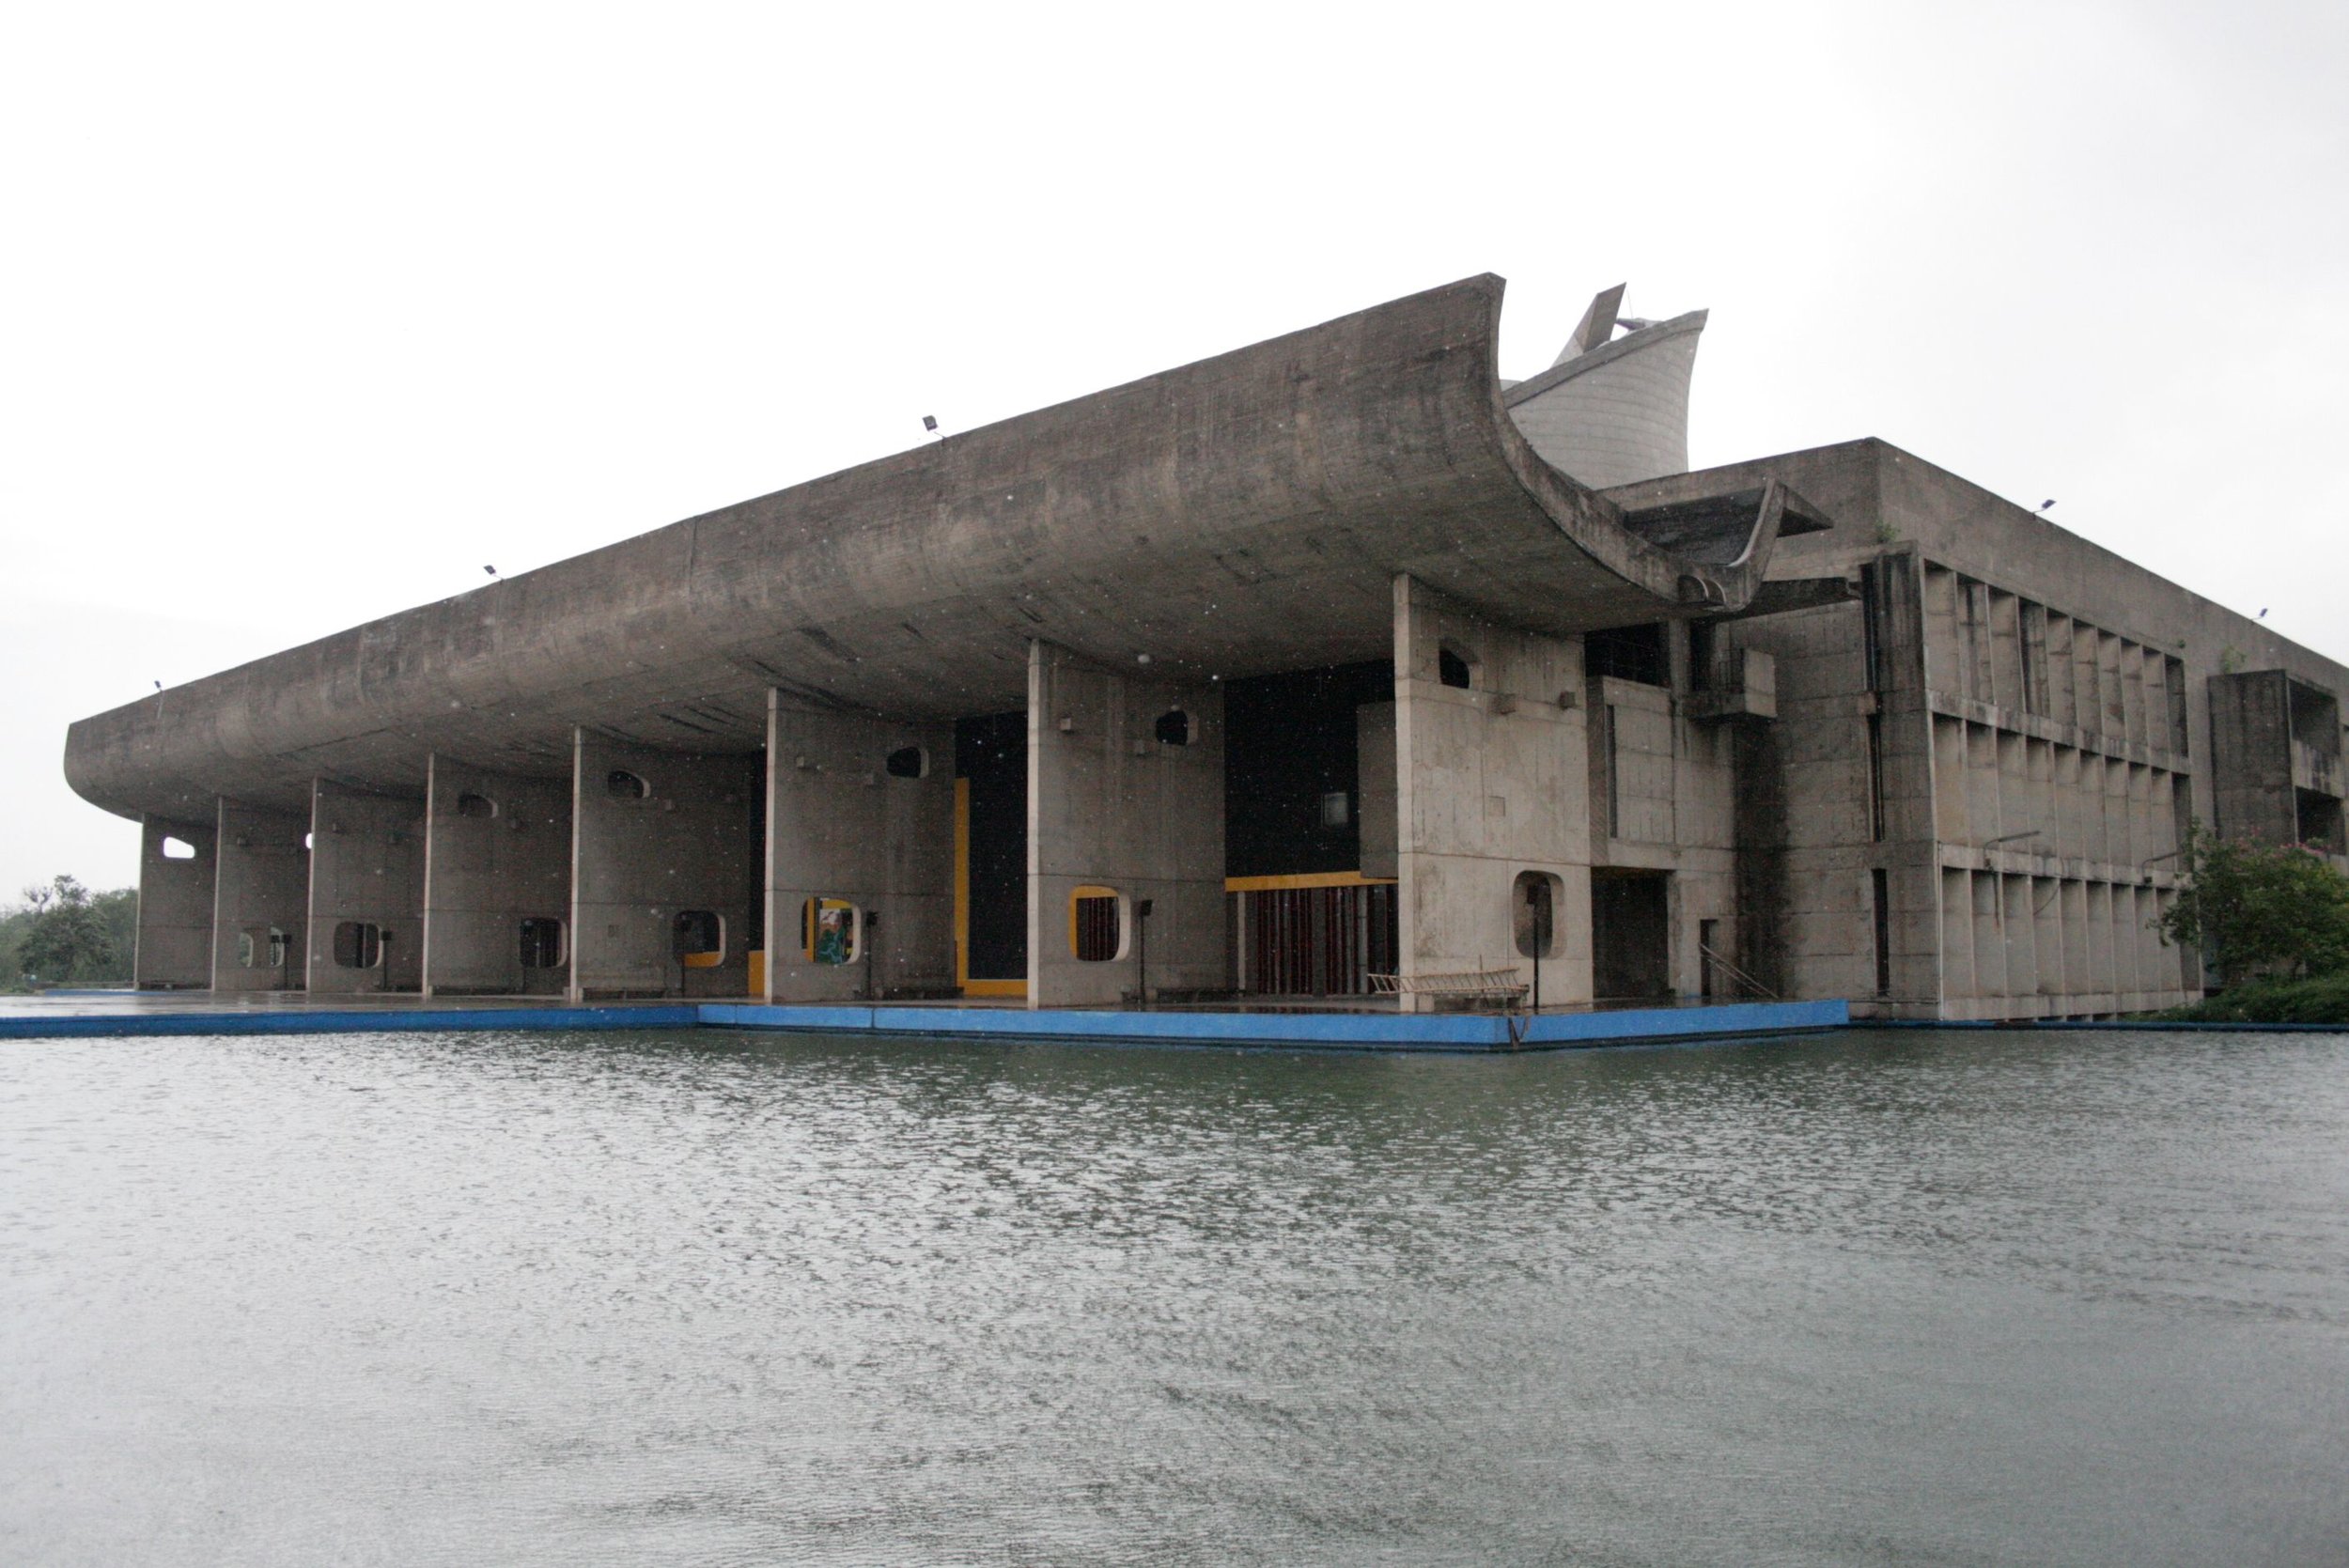 The Assembly Hall designed by Le Corbusier. (Eduardo Guiot/Flickr, CC BY 2.0) 